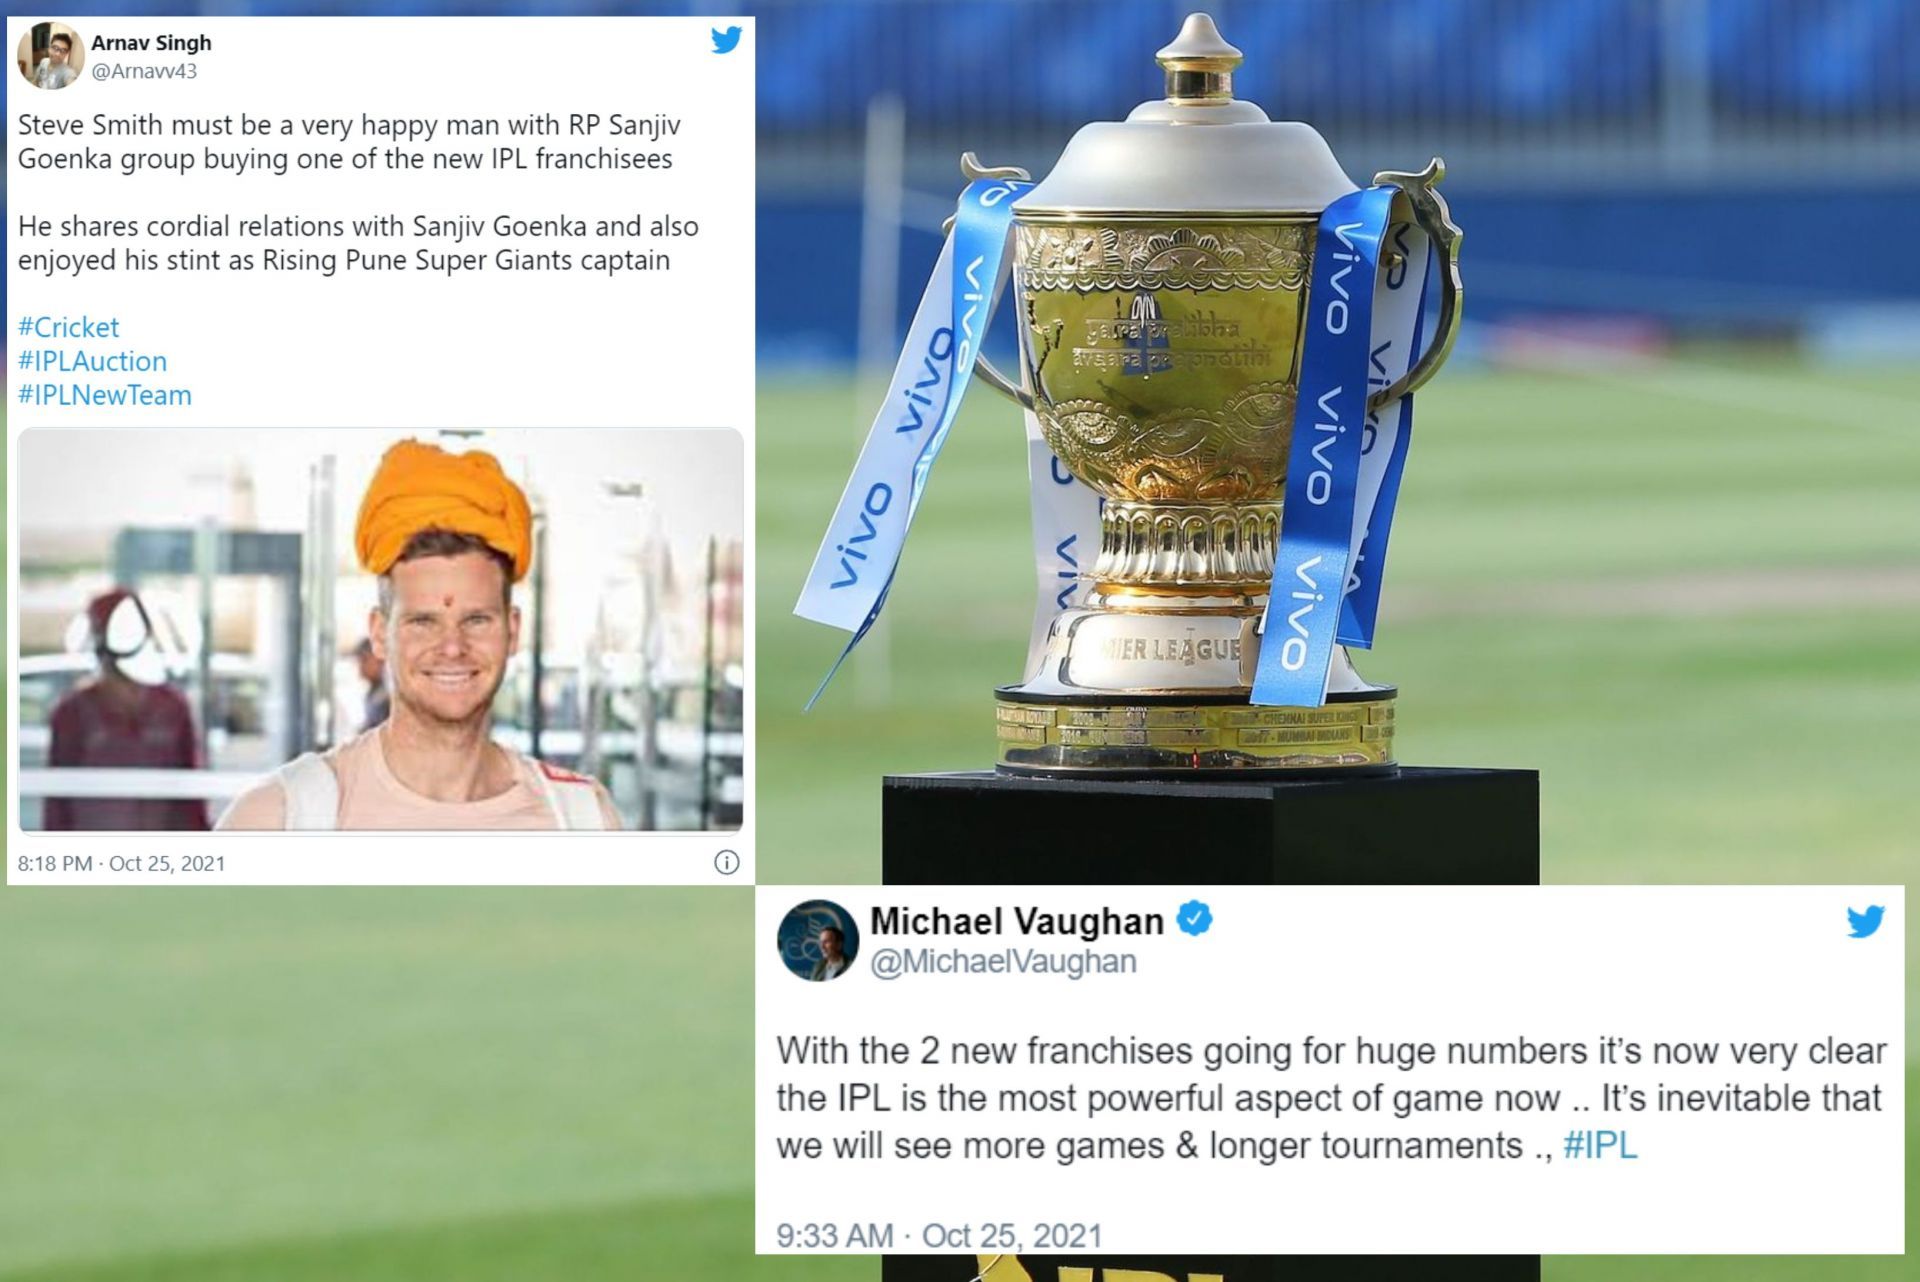 Twitterati is in awe of the massive bids made for two new IPL teams.